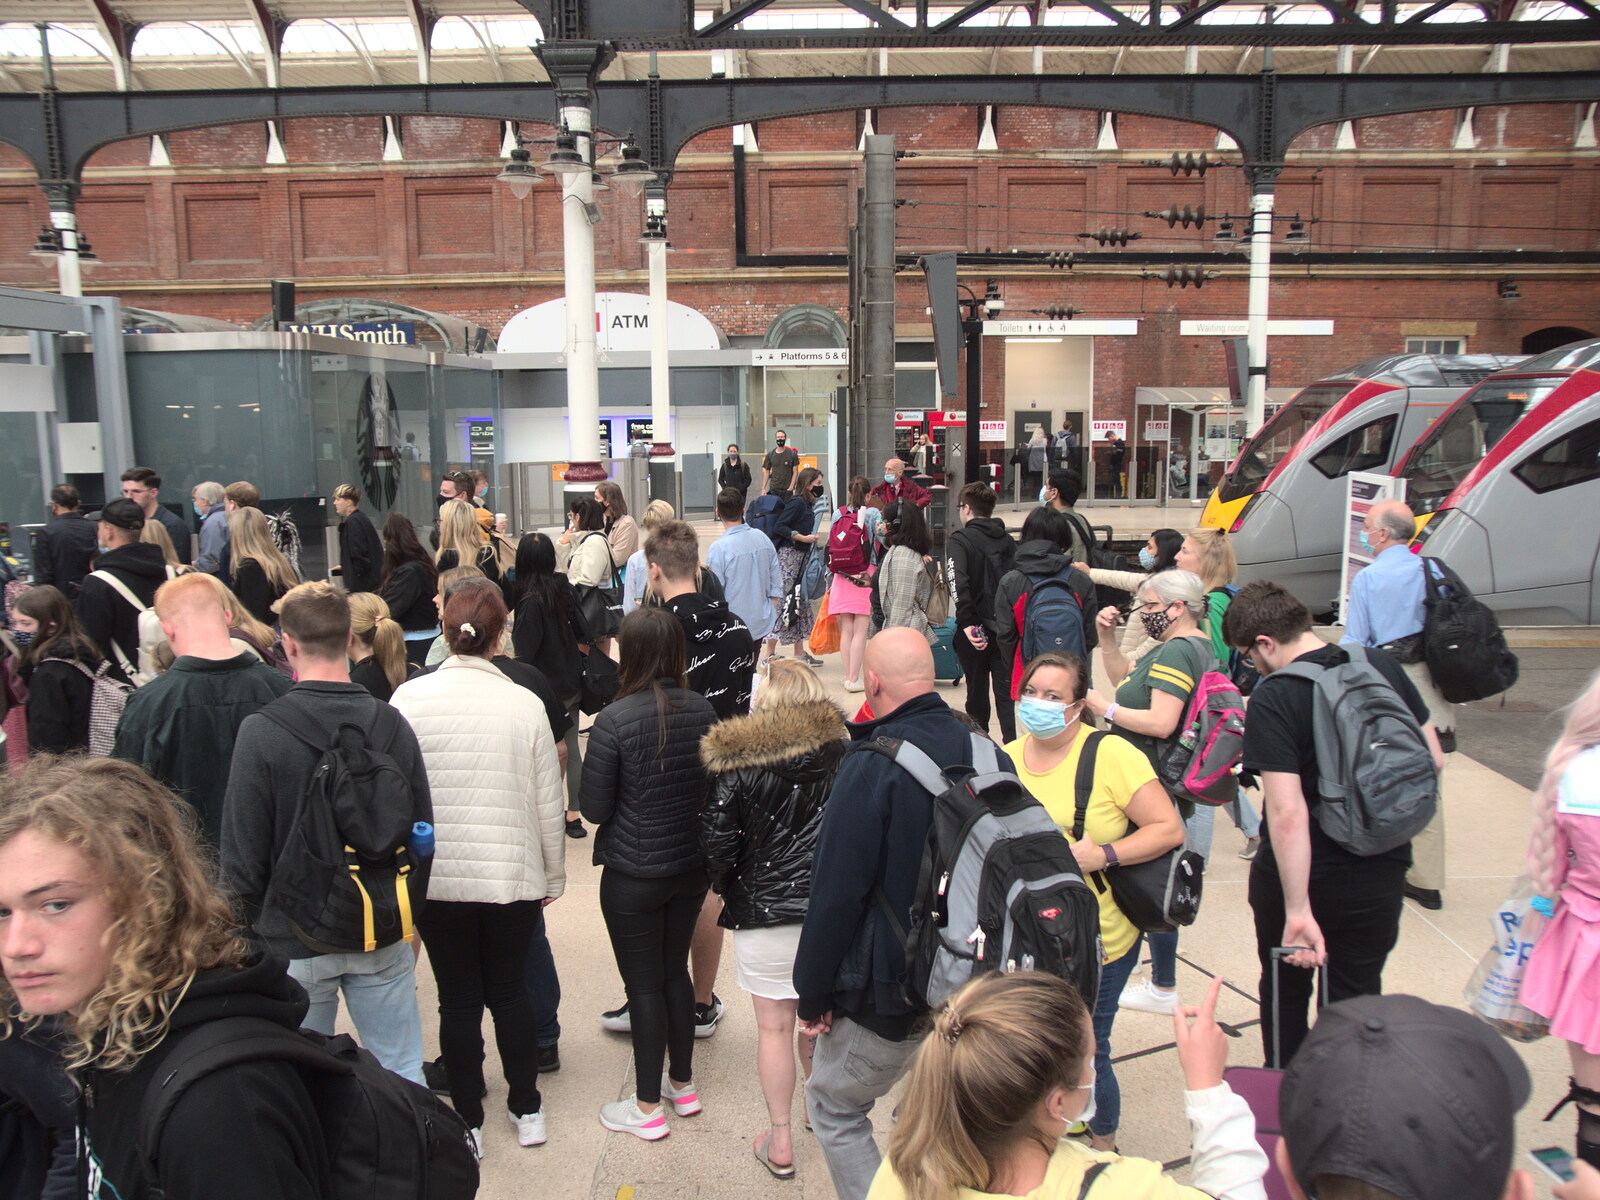 It's busy at Norwich railway station from Head Out Not Home: A Music Day, Norwich, Norfolk - 22nd August 2021